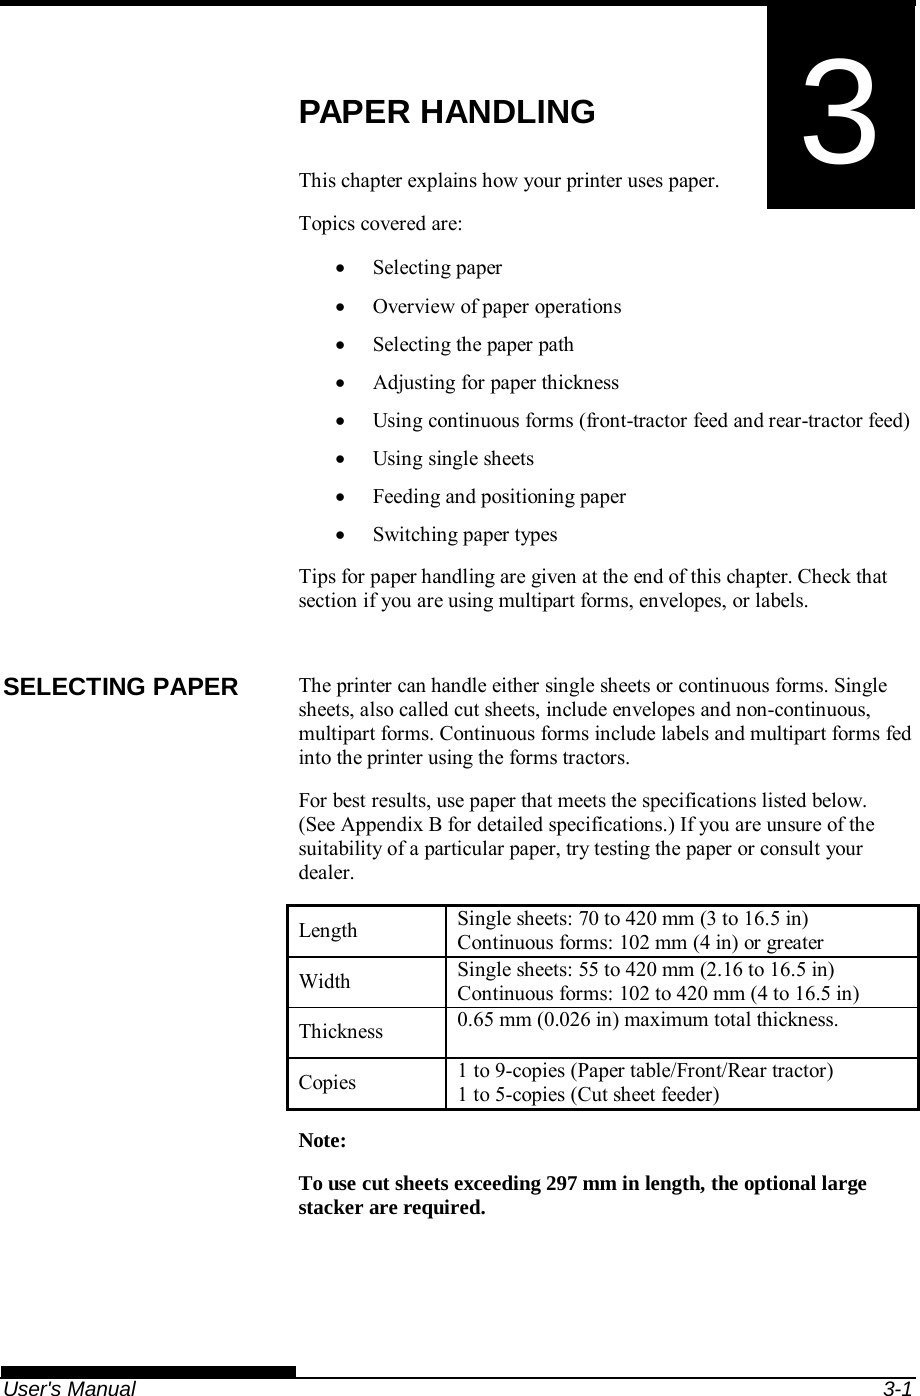   User&apos;s Manual  3-1 3 CHAPTER 3  PAPER HANDLING PAPER HANDLING This chapter explains how your printer uses paper. Topics covered are:  Selecting paper   Overview of paper operations   Selecting the paper path   Adjusting for paper thickness   Using continuous forms (front-tractor feed and rear-tractor feed)   Using single sheets   Feeding and positioning paper   Switching paper types Tips for paper handling are given at the end of this chapter. Check that section if you are using multipart forms, envelopes, or labels.  The printer can handle either single sheets or continuous forms. Single sheets, also called cut sheets, include envelopes and non-continuous, multipart forms. Continuous forms include labels and multipart forms fed into the printer using the forms tractors. For best results, use paper that meets the specifications listed below.  (See Appendix B for detailed specifications.) If you are unsure of the suitability of a particular paper, try testing the paper or consult your dealer. Length  Single sheets: 70 to 420 mm (3 to 16.5 in) Continuous forms: 102 mm (4 in) or greater Width  Single sheets: 55 to 420 mm (2.16 to 16.5 in) Continuous forms: 102 to 420 mm (4 to 16.5 in) Thickness  0.65 mm (0.026 in) maximum total thickness. Copies  1 to 9-copies (Paper table/Front/Rear tractor) 1 to 5-copies (Cut sheet feeder) Note: To use cut sheets exceeding 297 mm in length, the optional large stacker are required.  SELECTING PAPER 